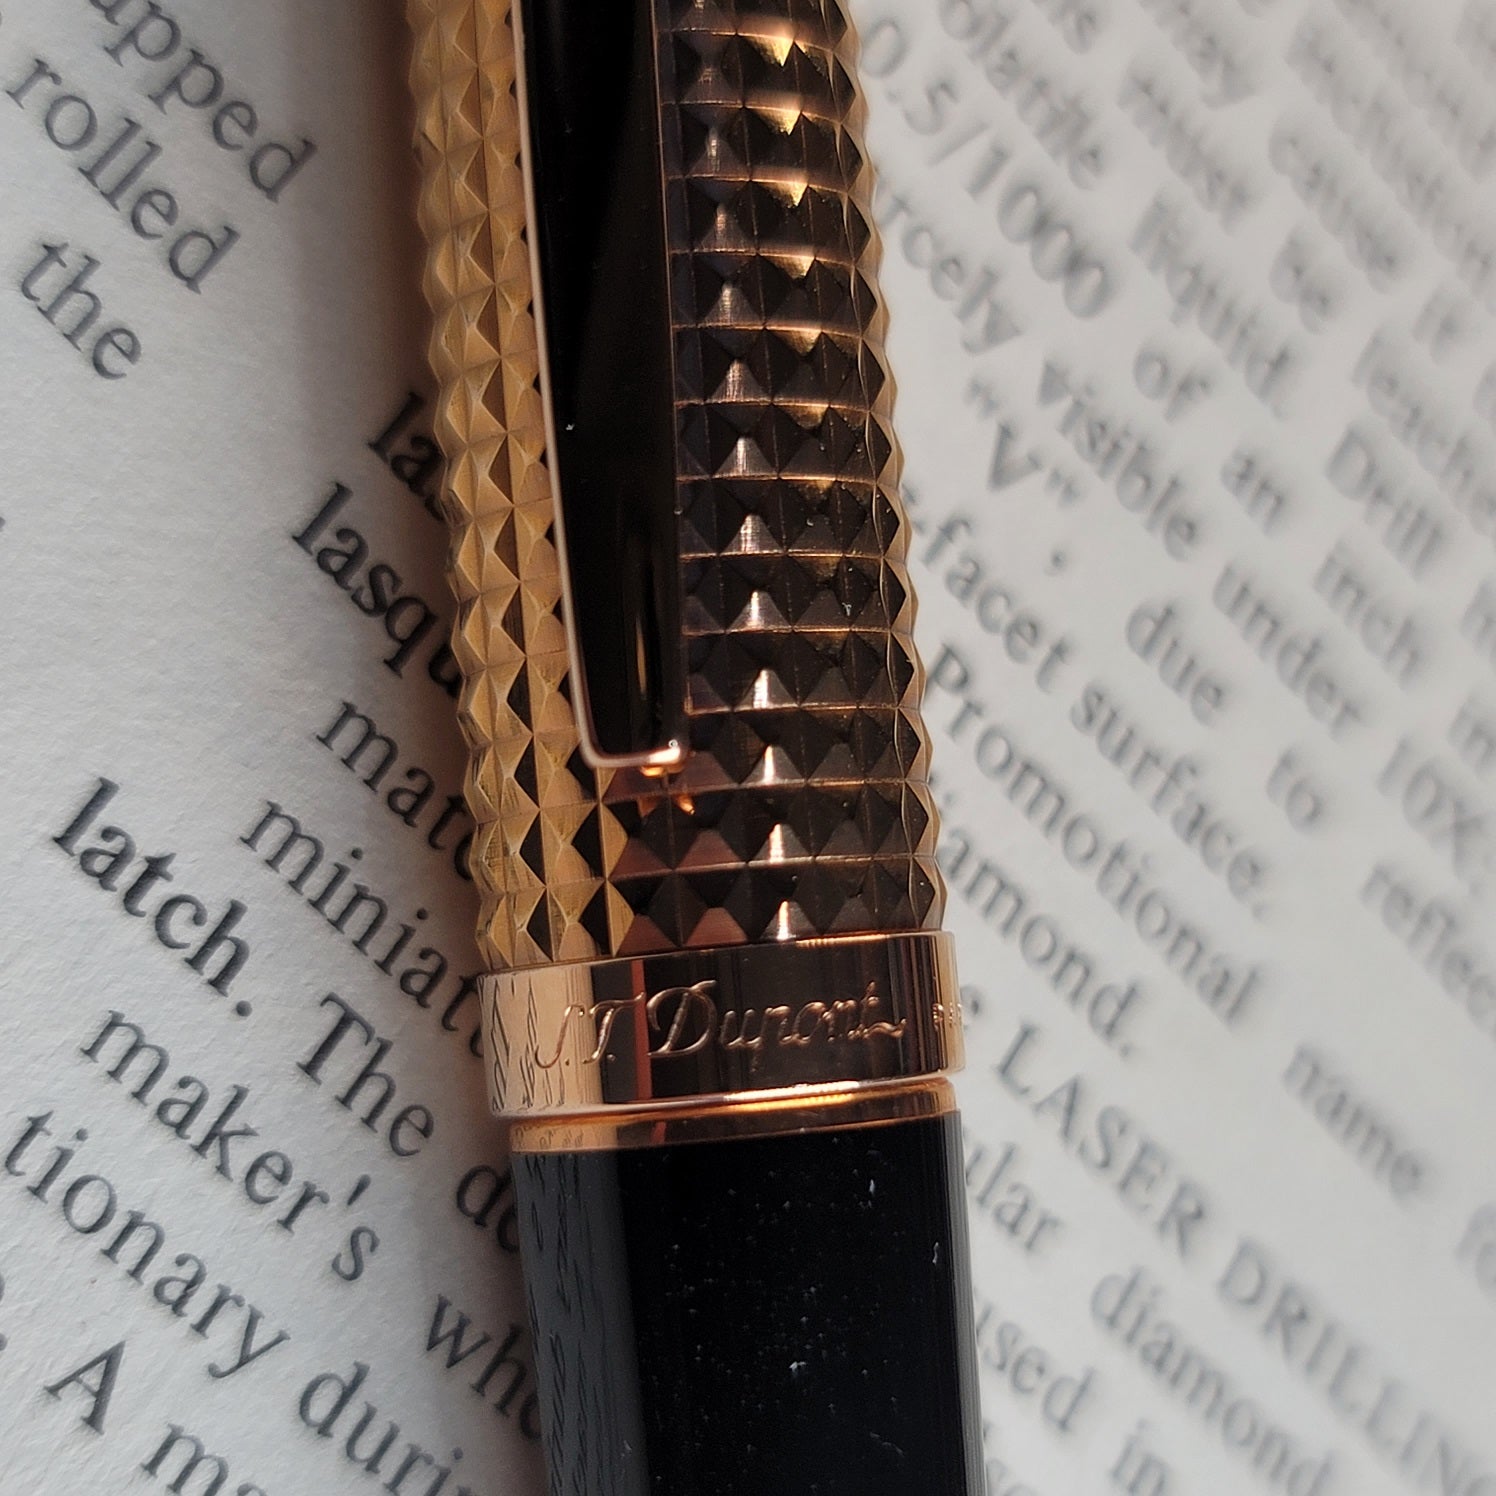 Olympio S.T. Dupont Cote D'Azur Rose Gold Fountainl Pen - New in Box with Papers | Peters Vaults